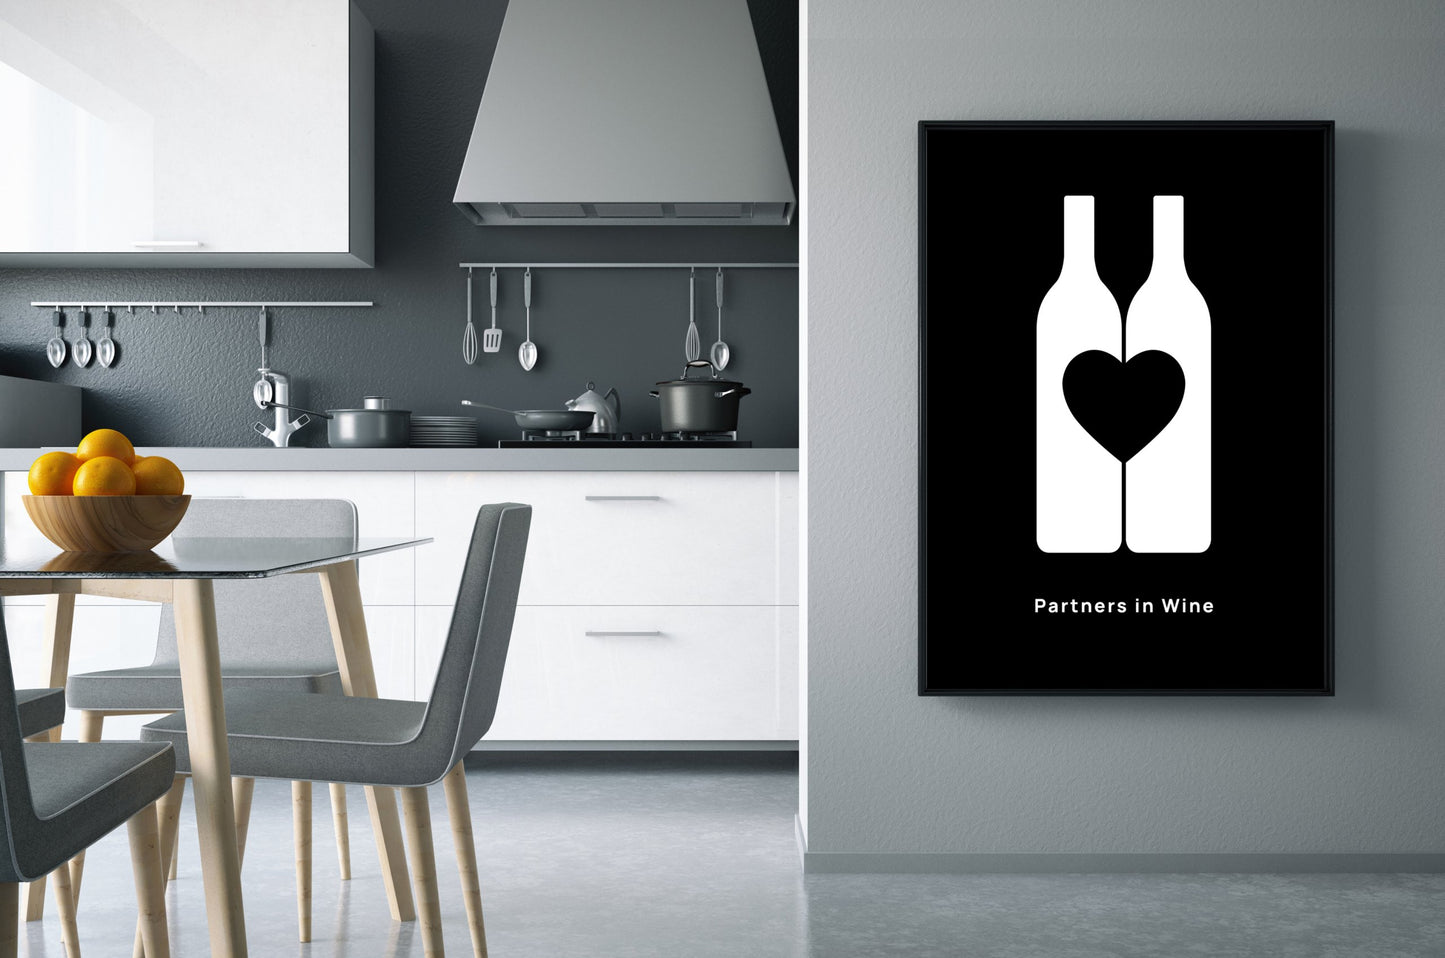 Poster Partners in Wine #1